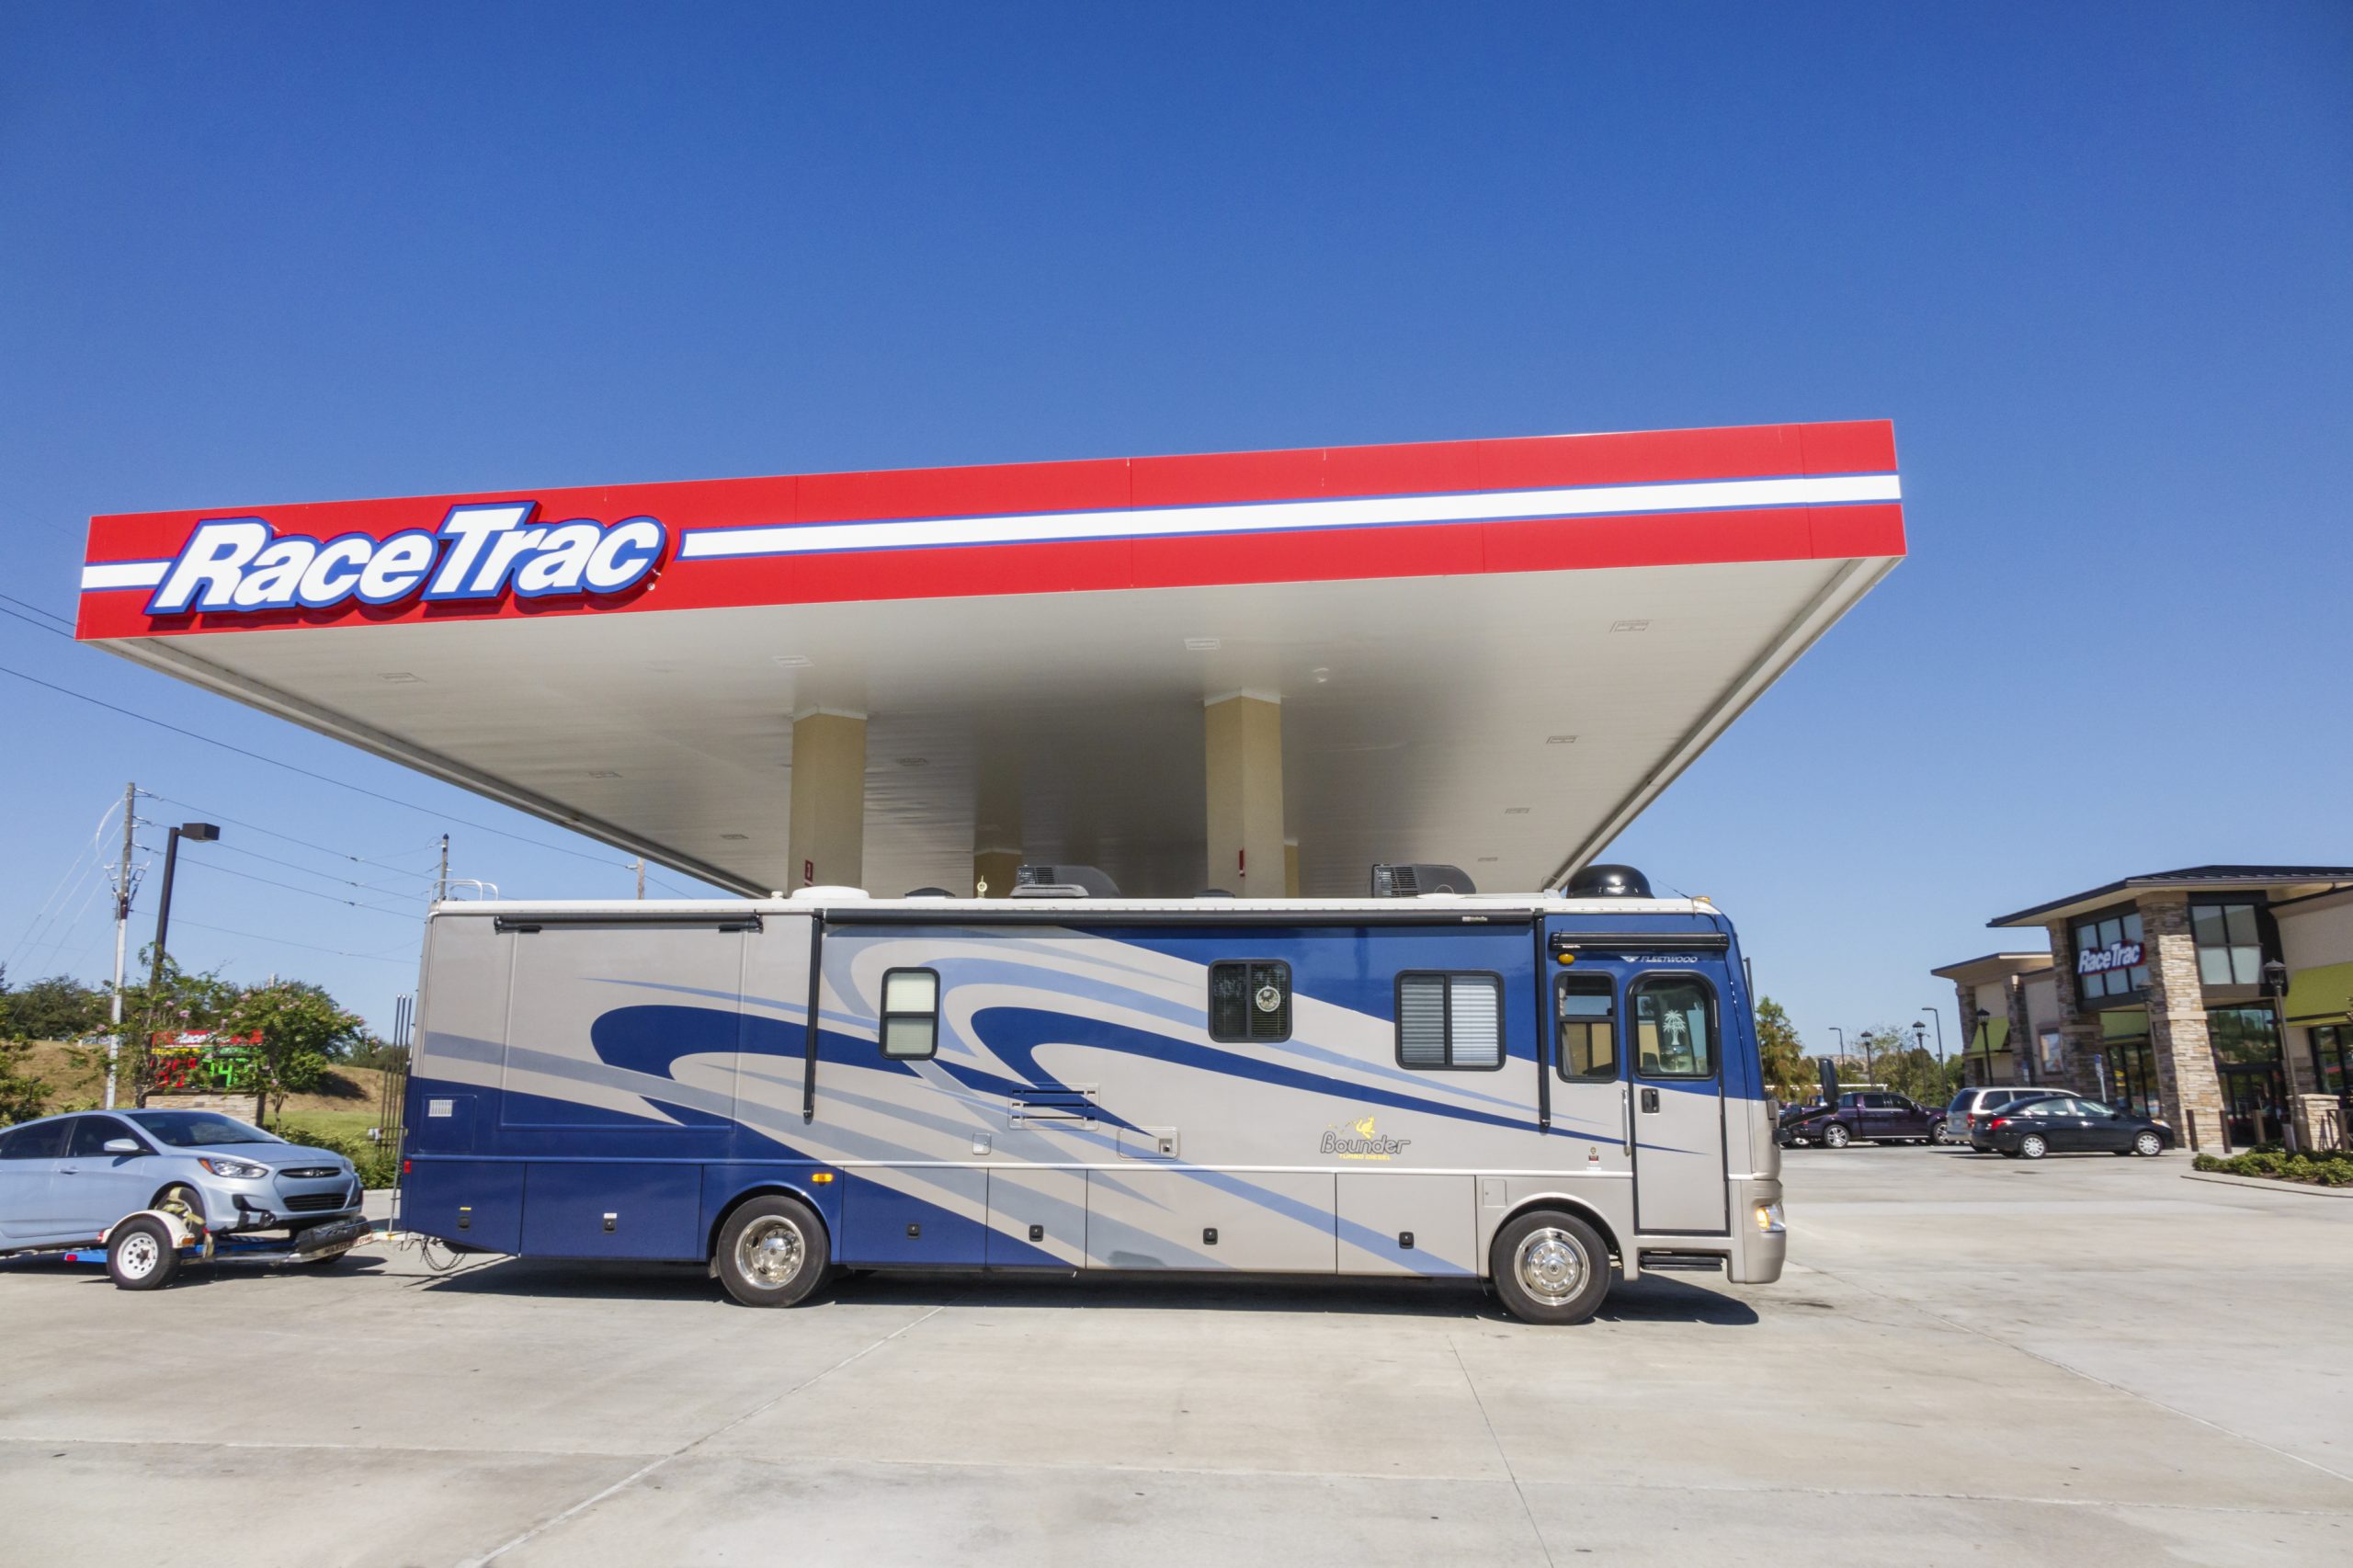 An RV towing a car refuels at a gas station